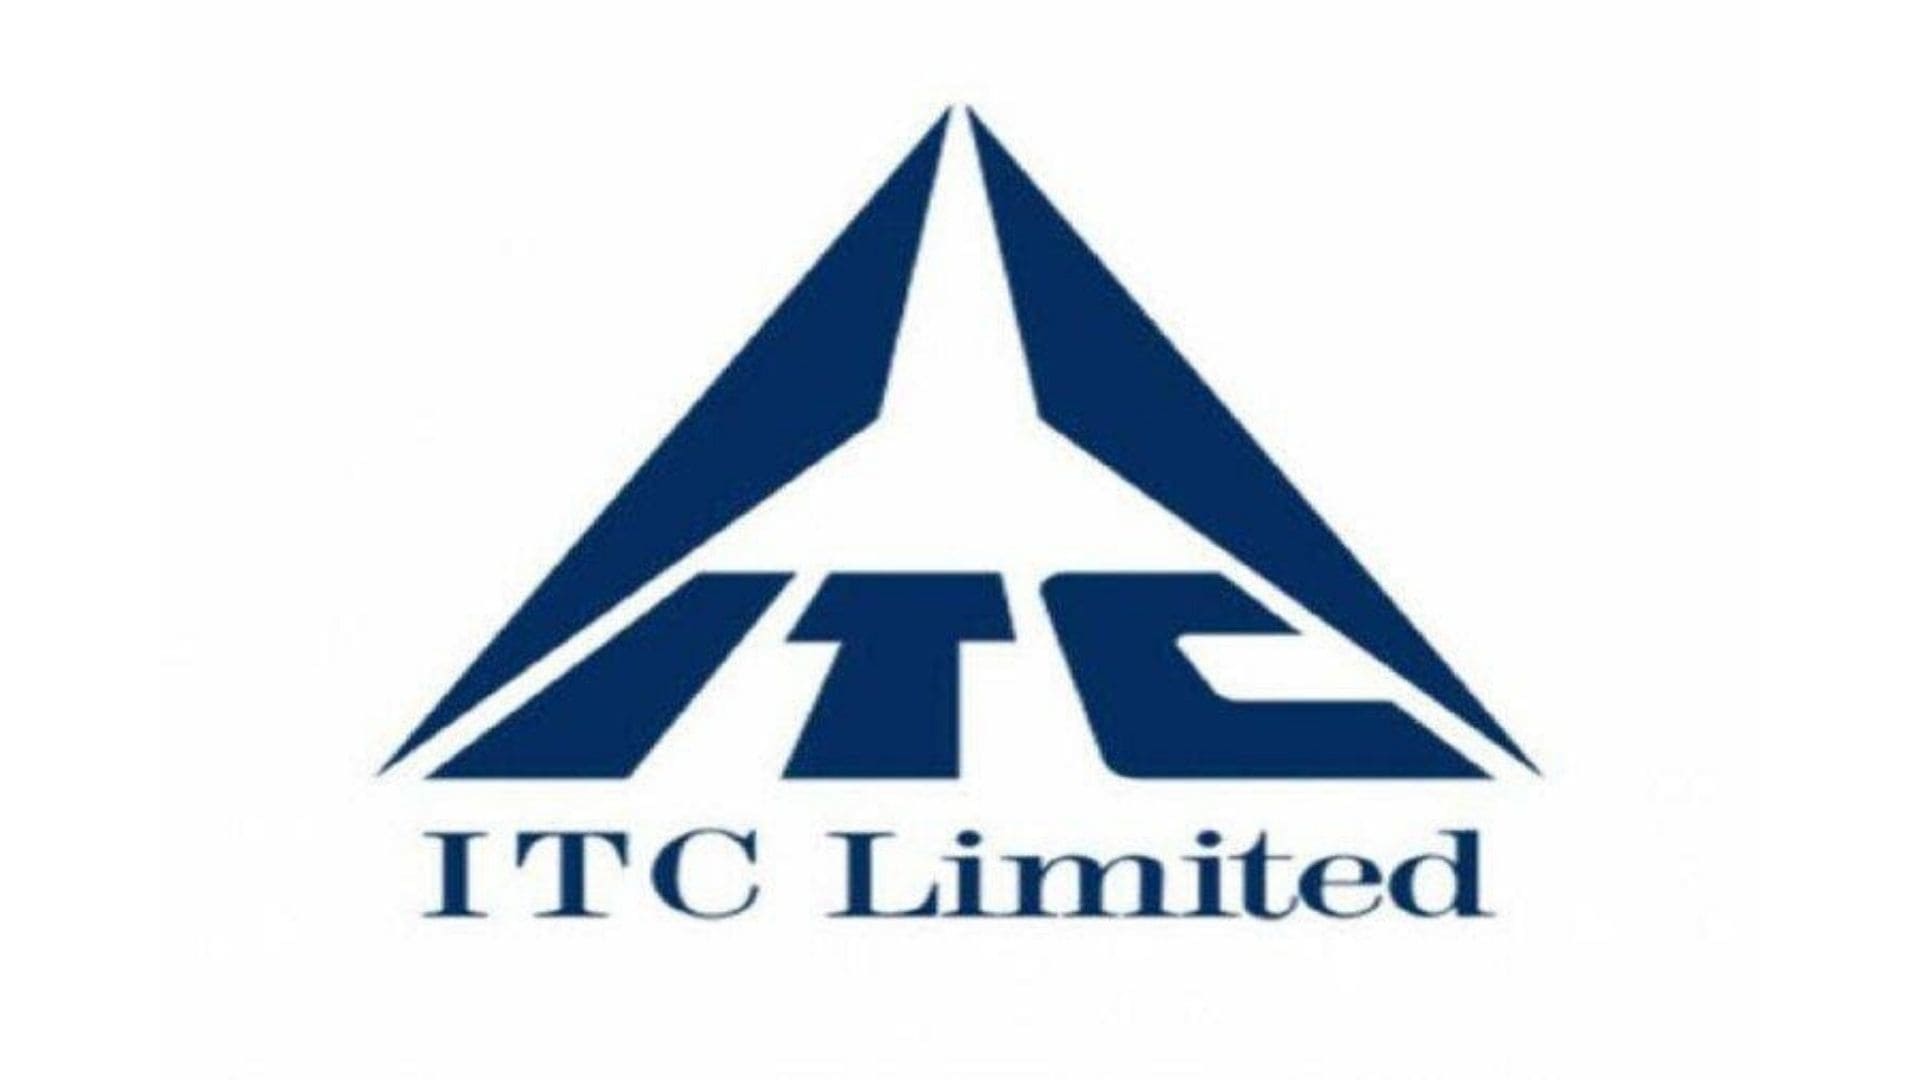 ITC Limited: One Of India's Foremost Private Sector Companies [A Case Study]